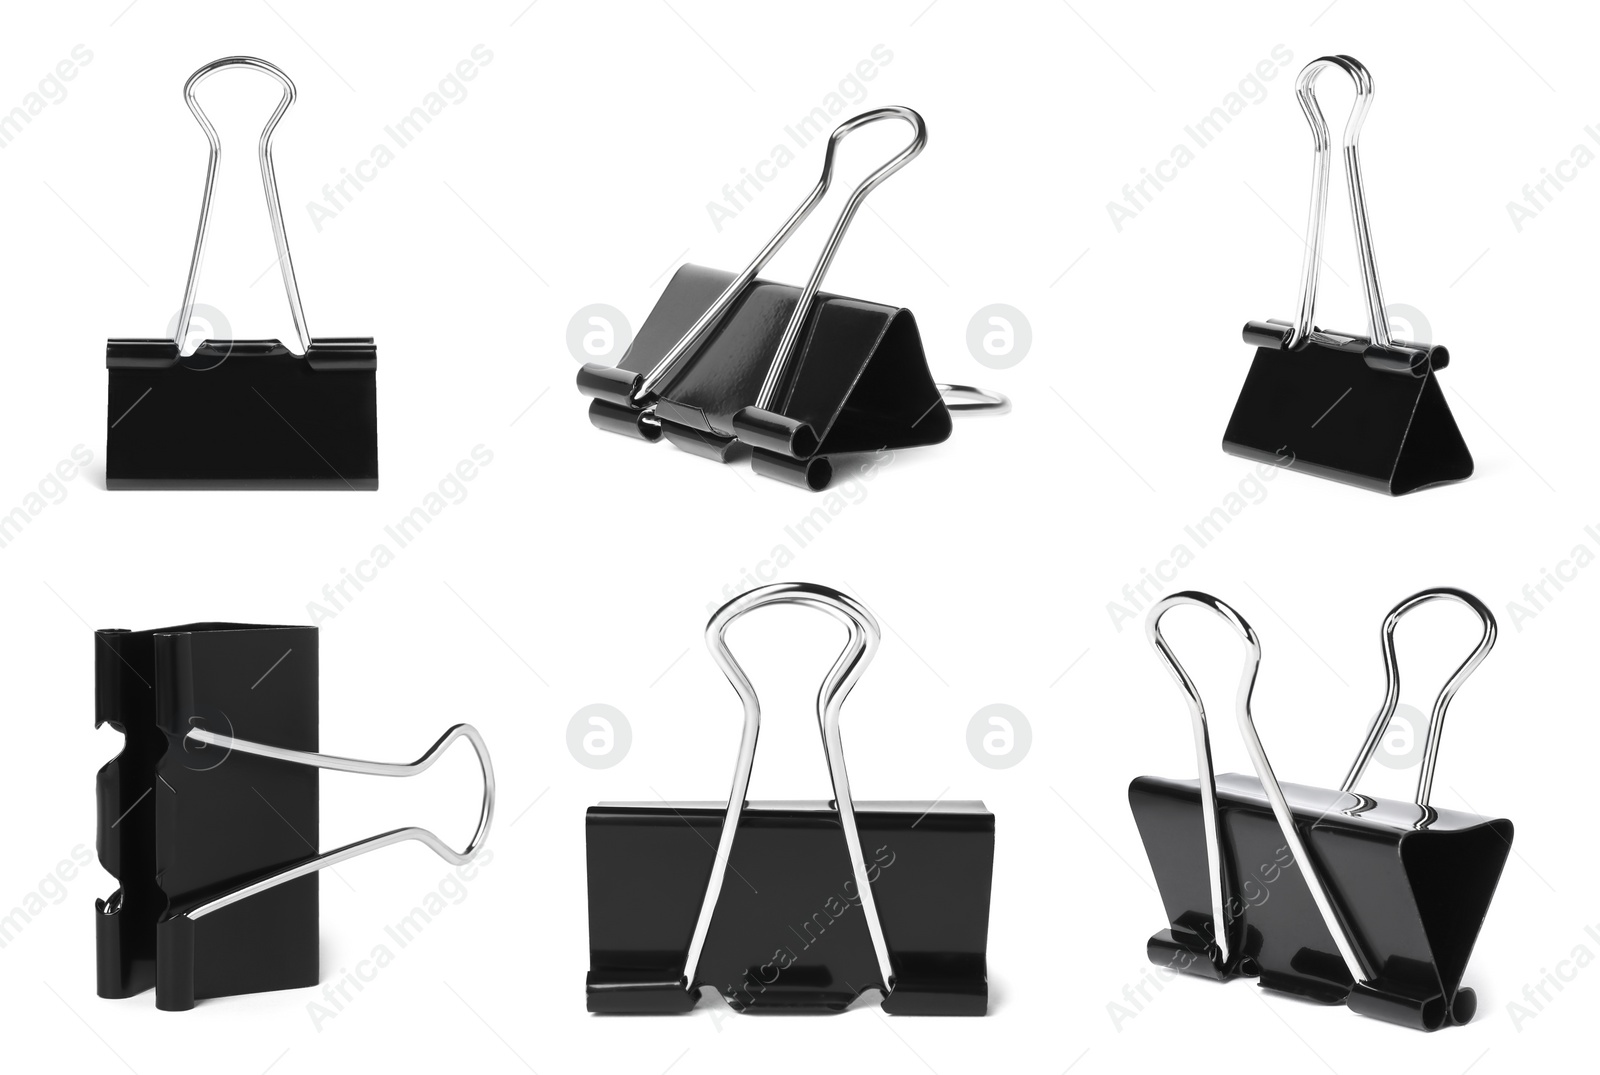 Image of Set with black binder clips on white background